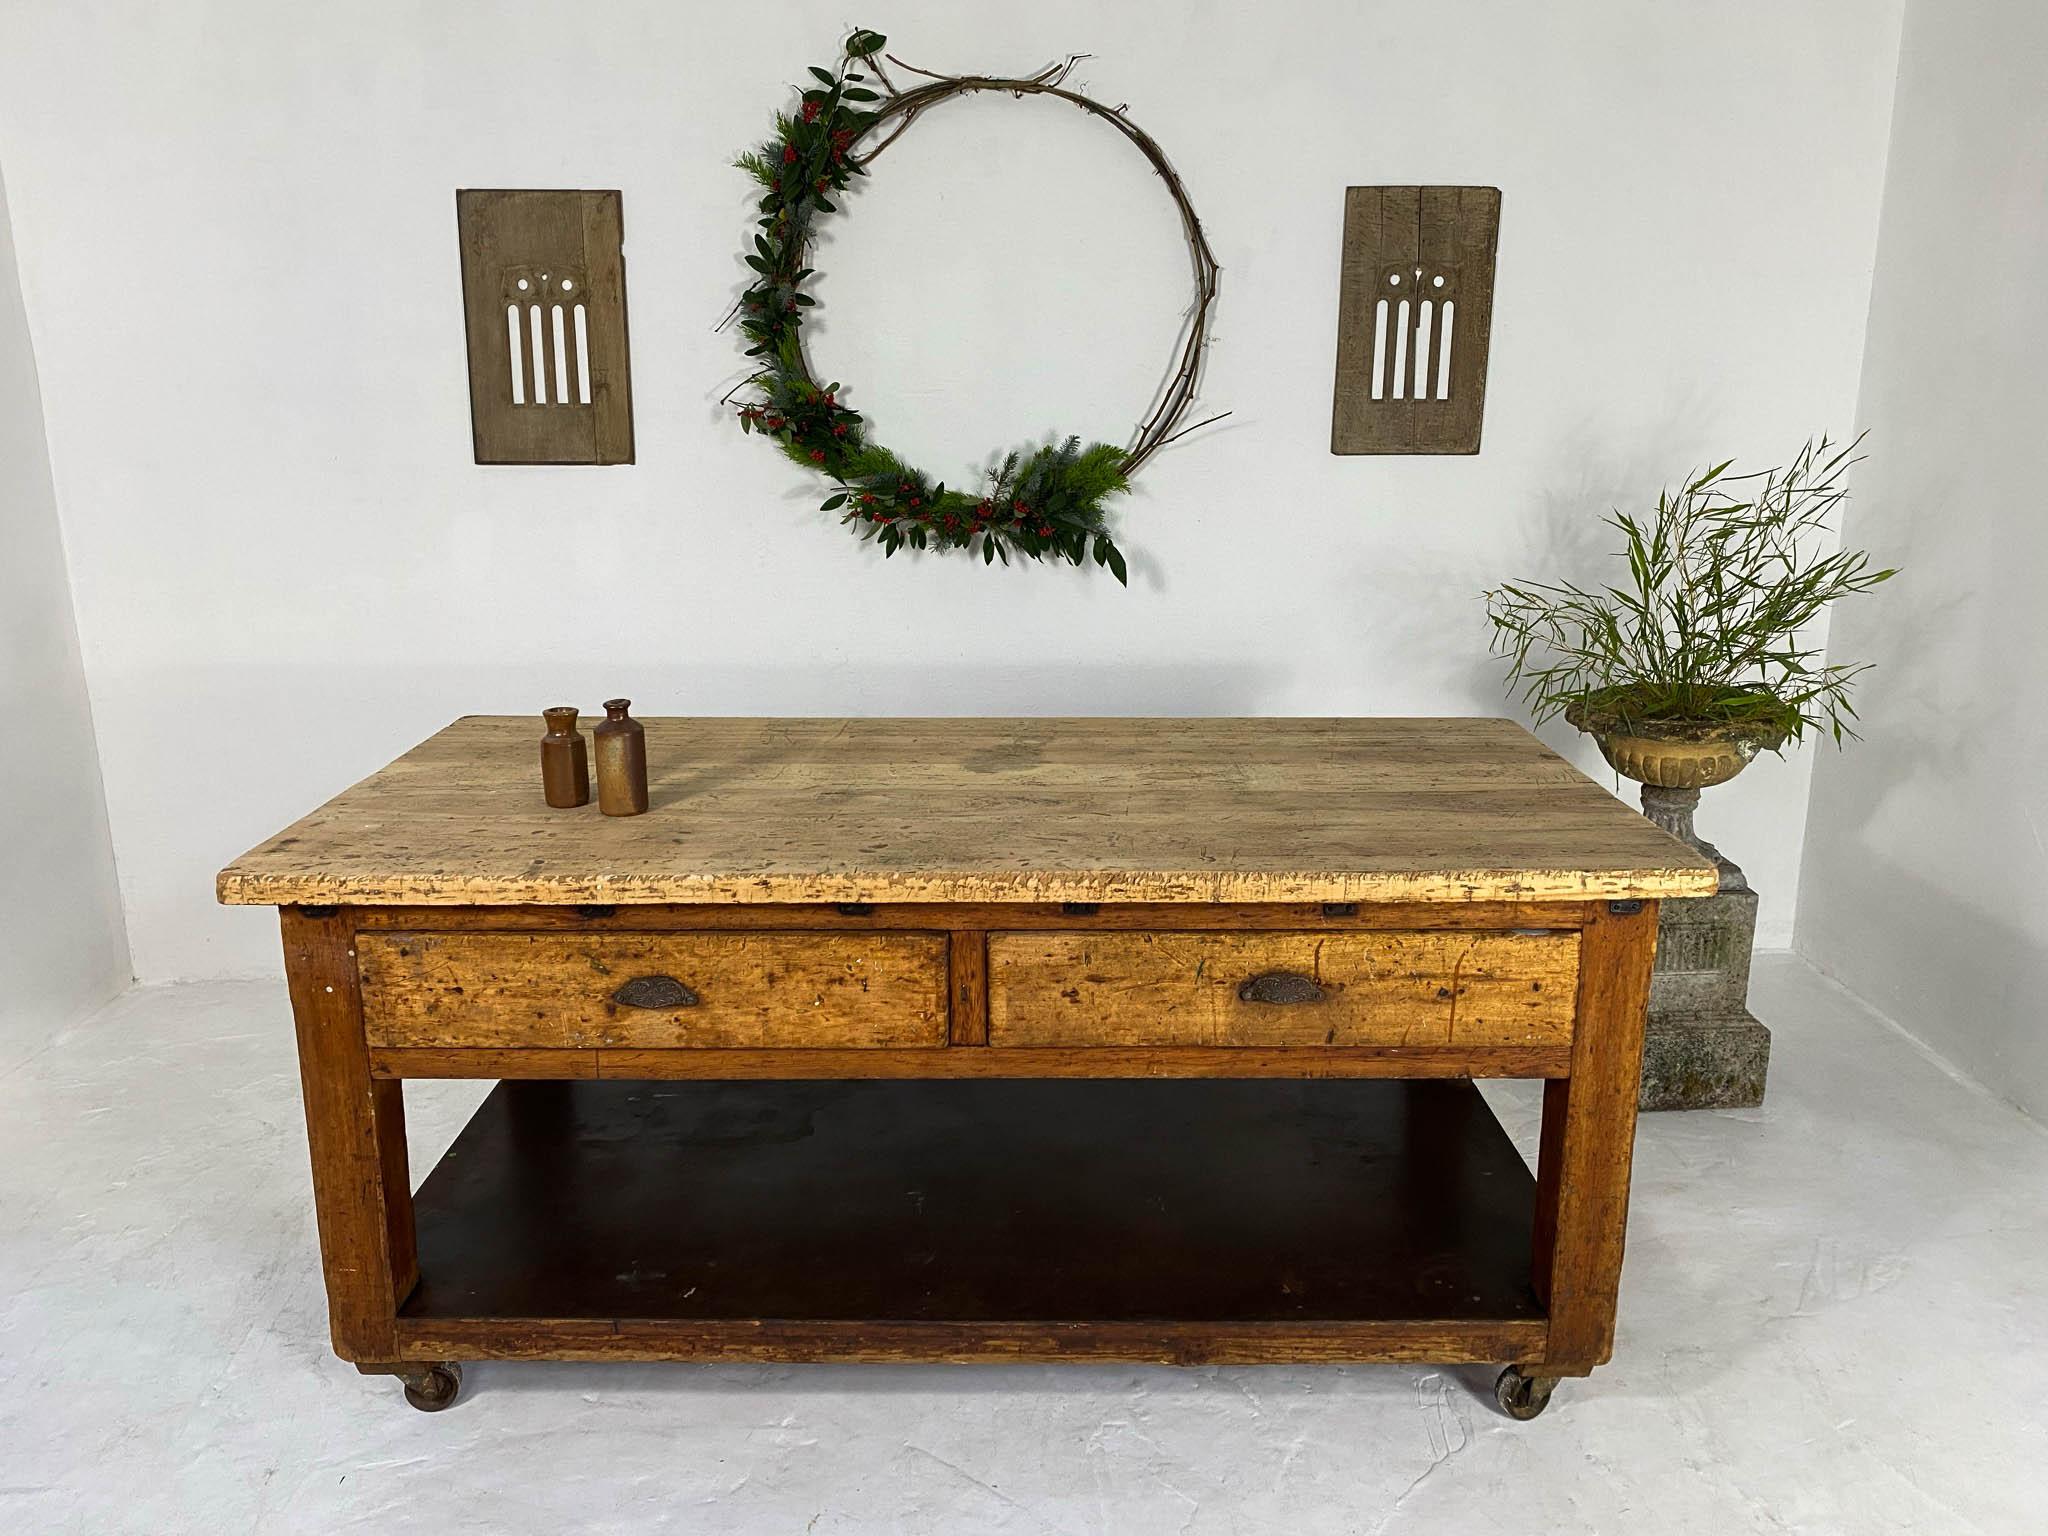 All original antique pine Baker's table, originally from a bakery in St Albans, England; but later used as an artist's table. We have cleaned and done some light restoration; lightly sanding and sealing the top so it is nice and smooth! We